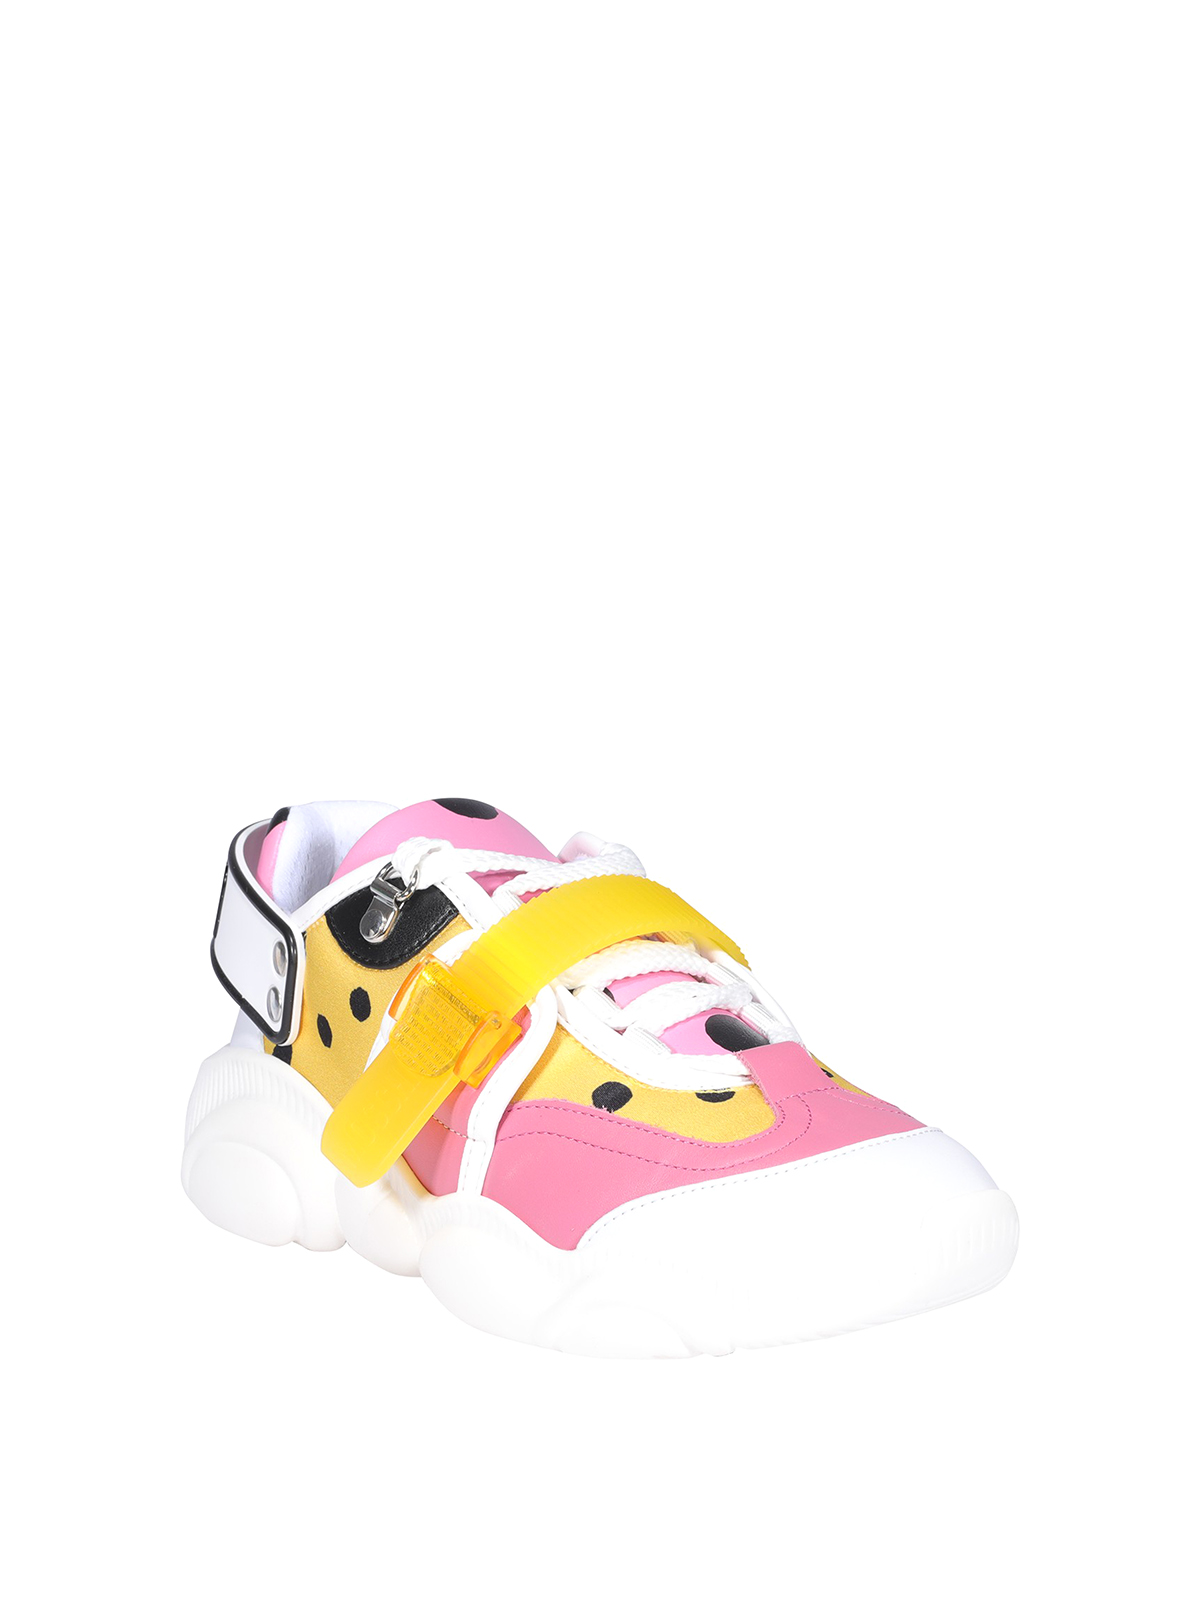 Trainers Moschino - Teddy Roller Skates - MA15133G1CMP540A